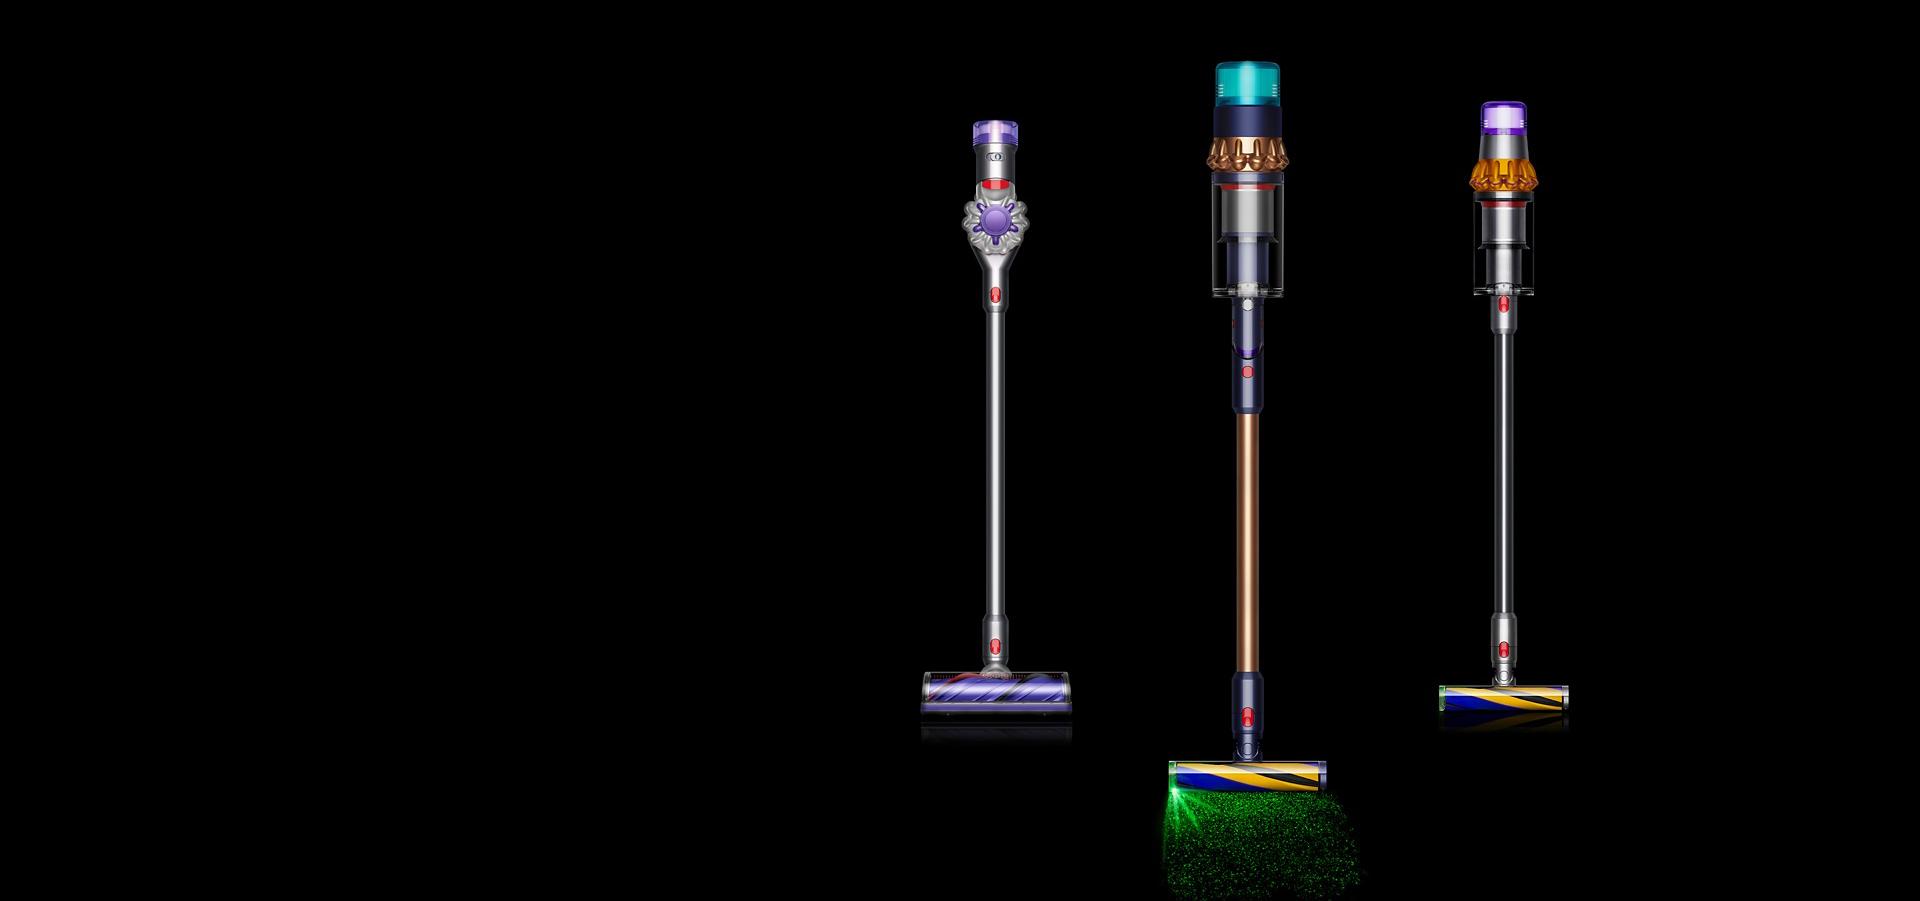 Three different Dyson vacuums shown front-on, in a row.